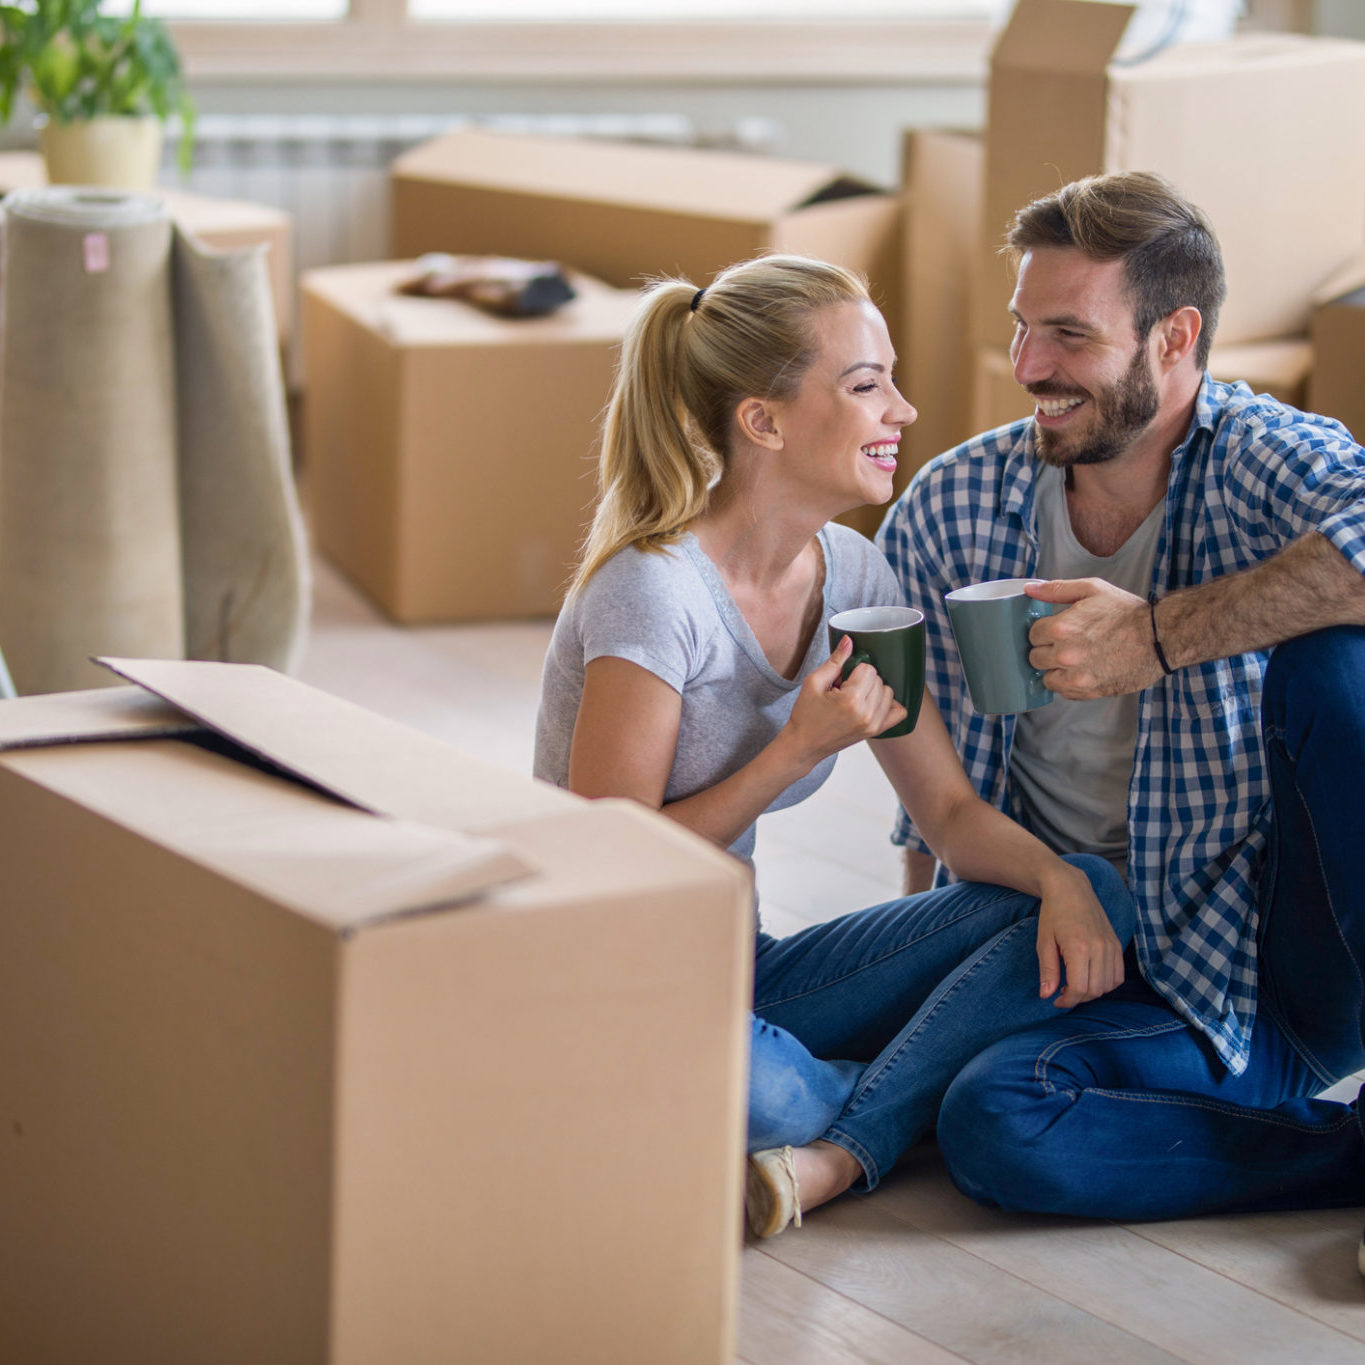 interstate moving and packing/storage services